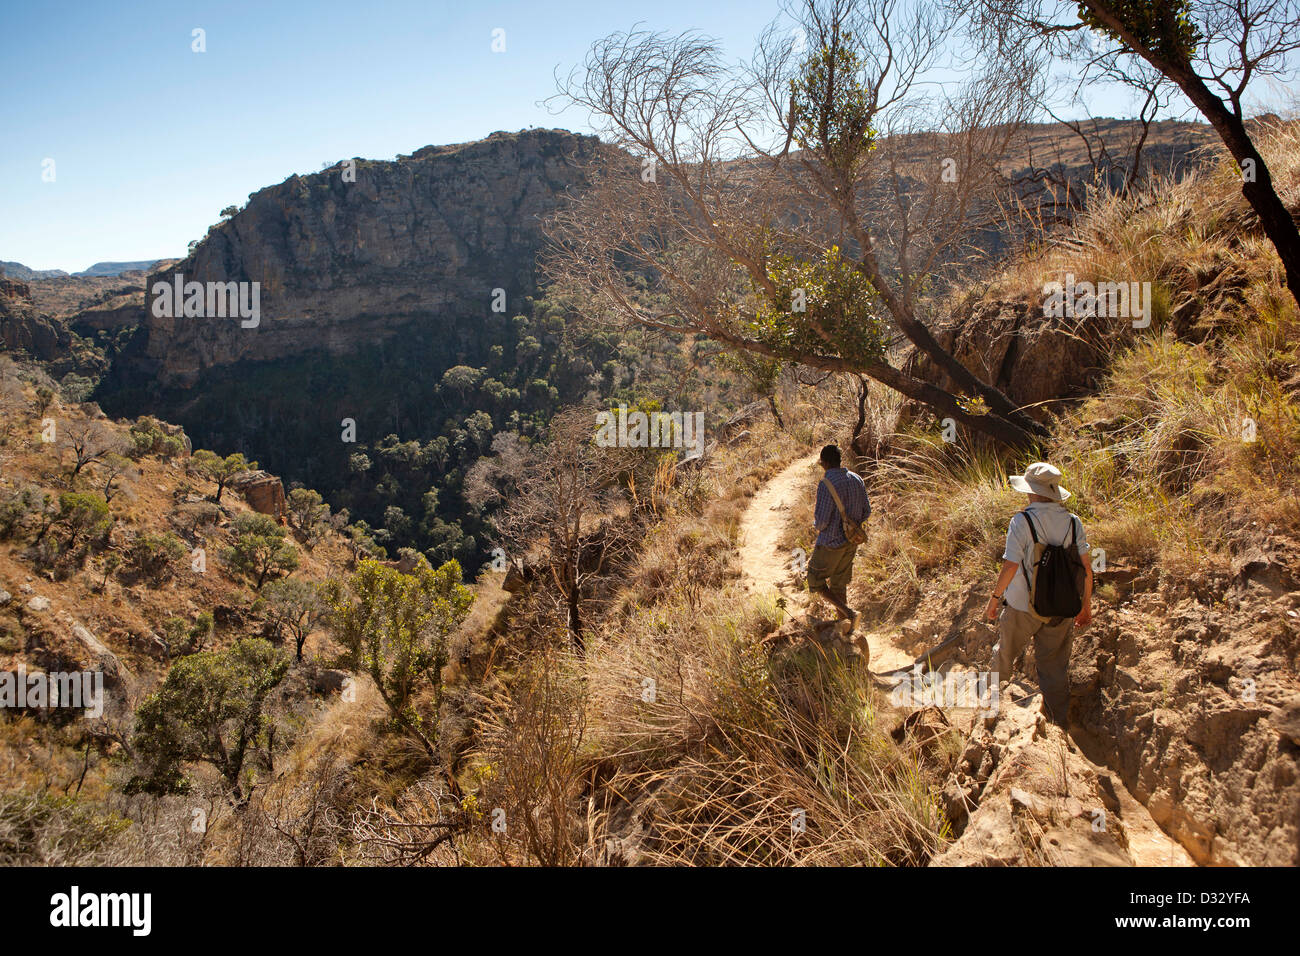 Madagascar, Parc National de l’Isalo, Namaza, tourist and guide walking down rocky trail Stock Photo